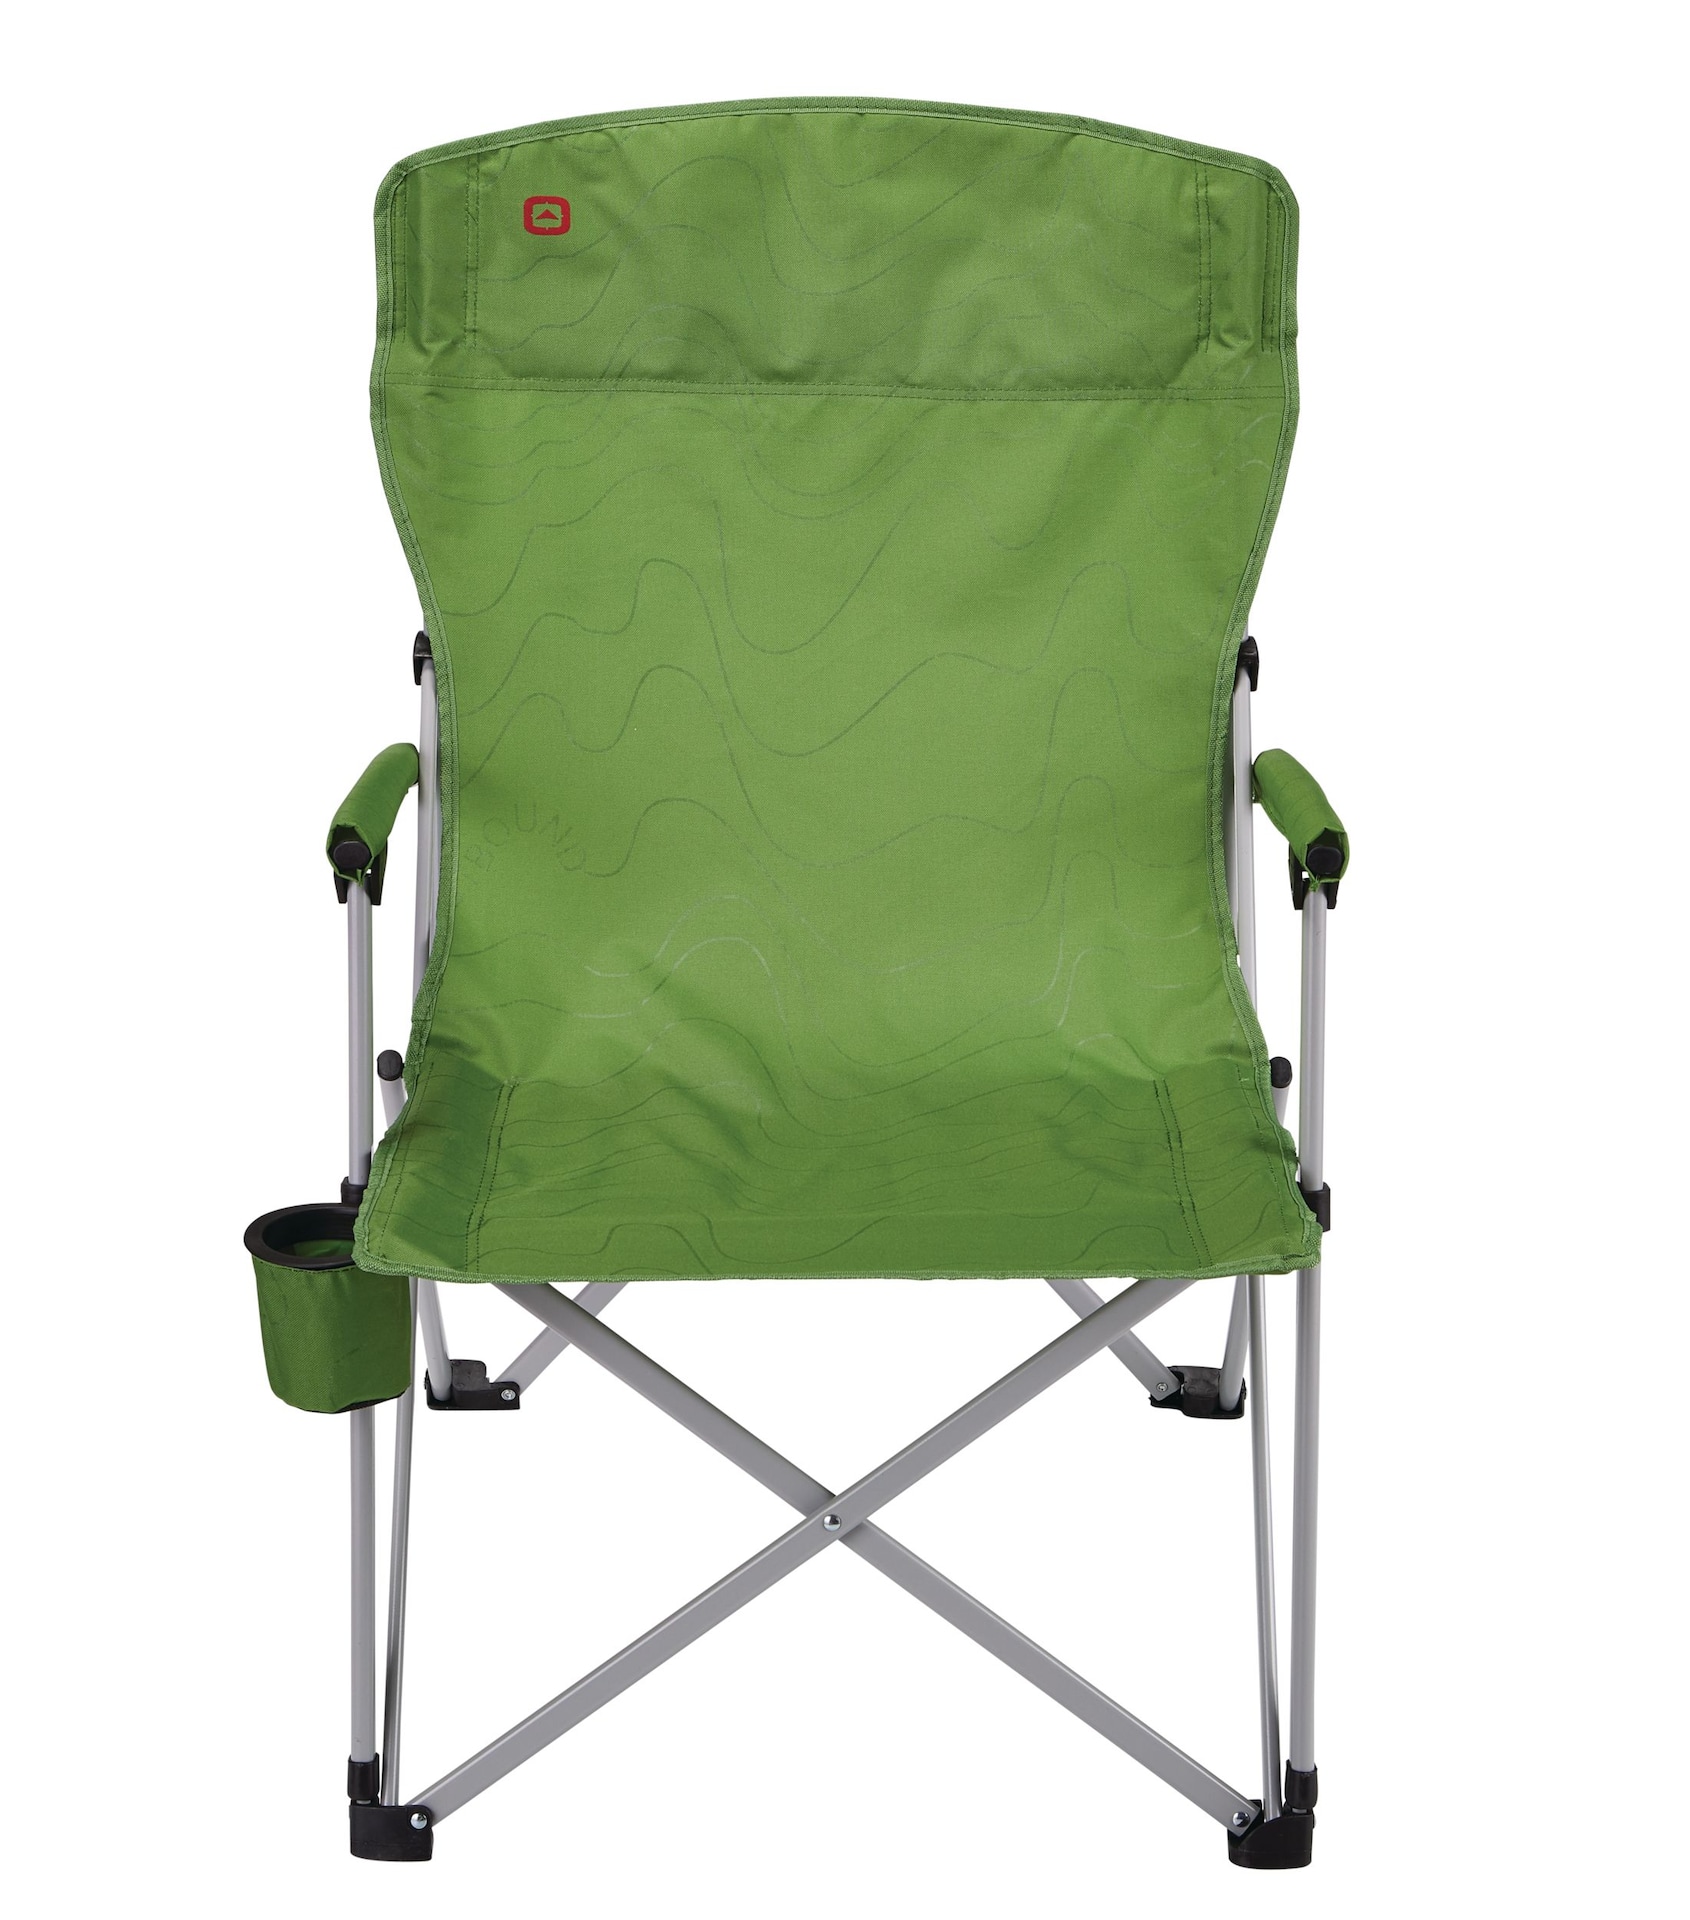 Camping Fishing Seat Stool Outdoor Ultralight Folding Chair Ice Cooler  Insulated Picnic Bags Ice Bag Stool Beach Hiking Chairs